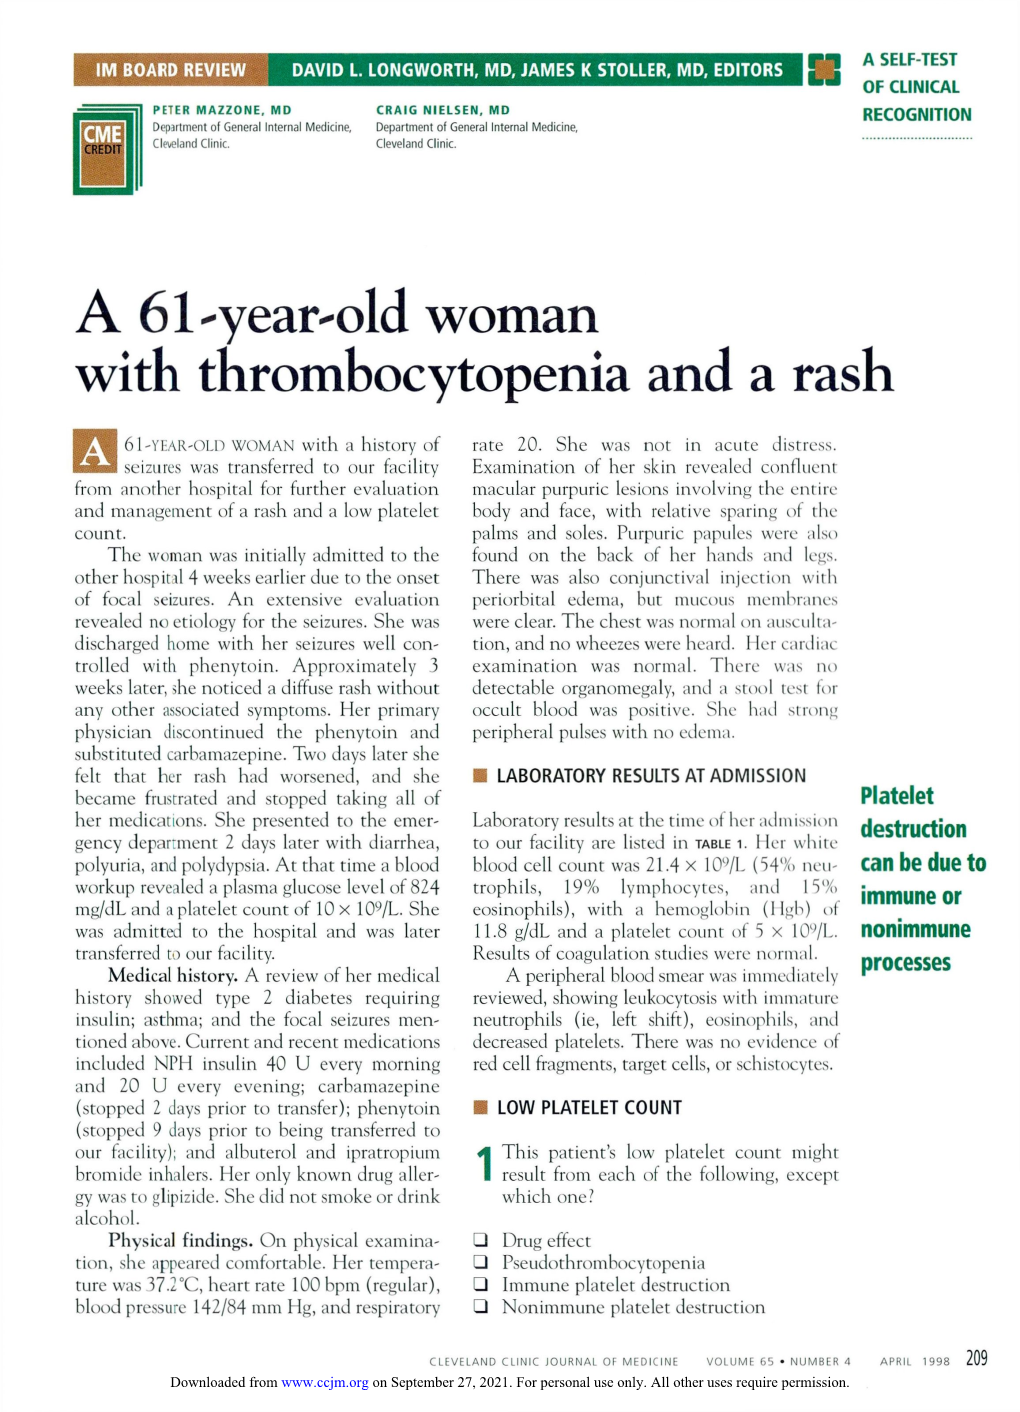 A 61-Year-Old Woman with Thrombocytopenia and a Rash